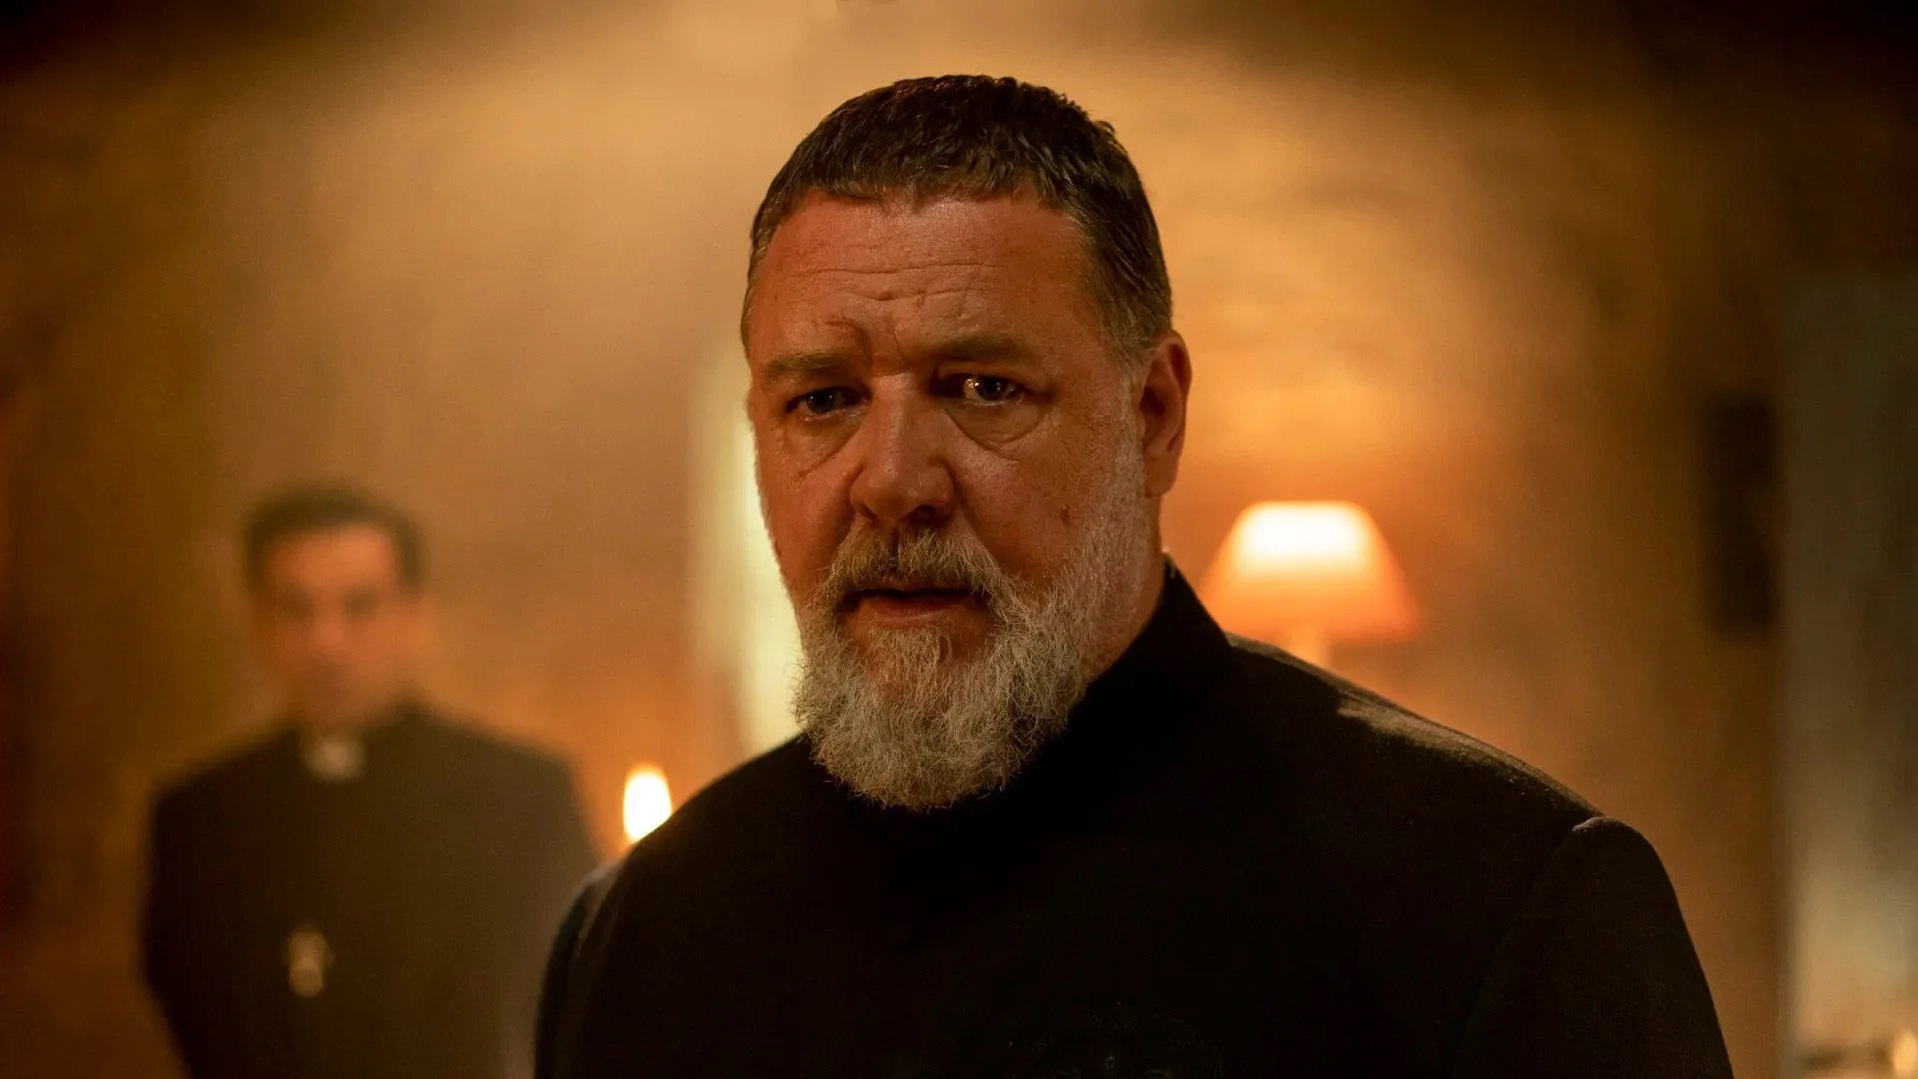  That movie where Russell Crowe plays an exorcist might have mixed up the Spanish and Dragon Age Inquisitions 